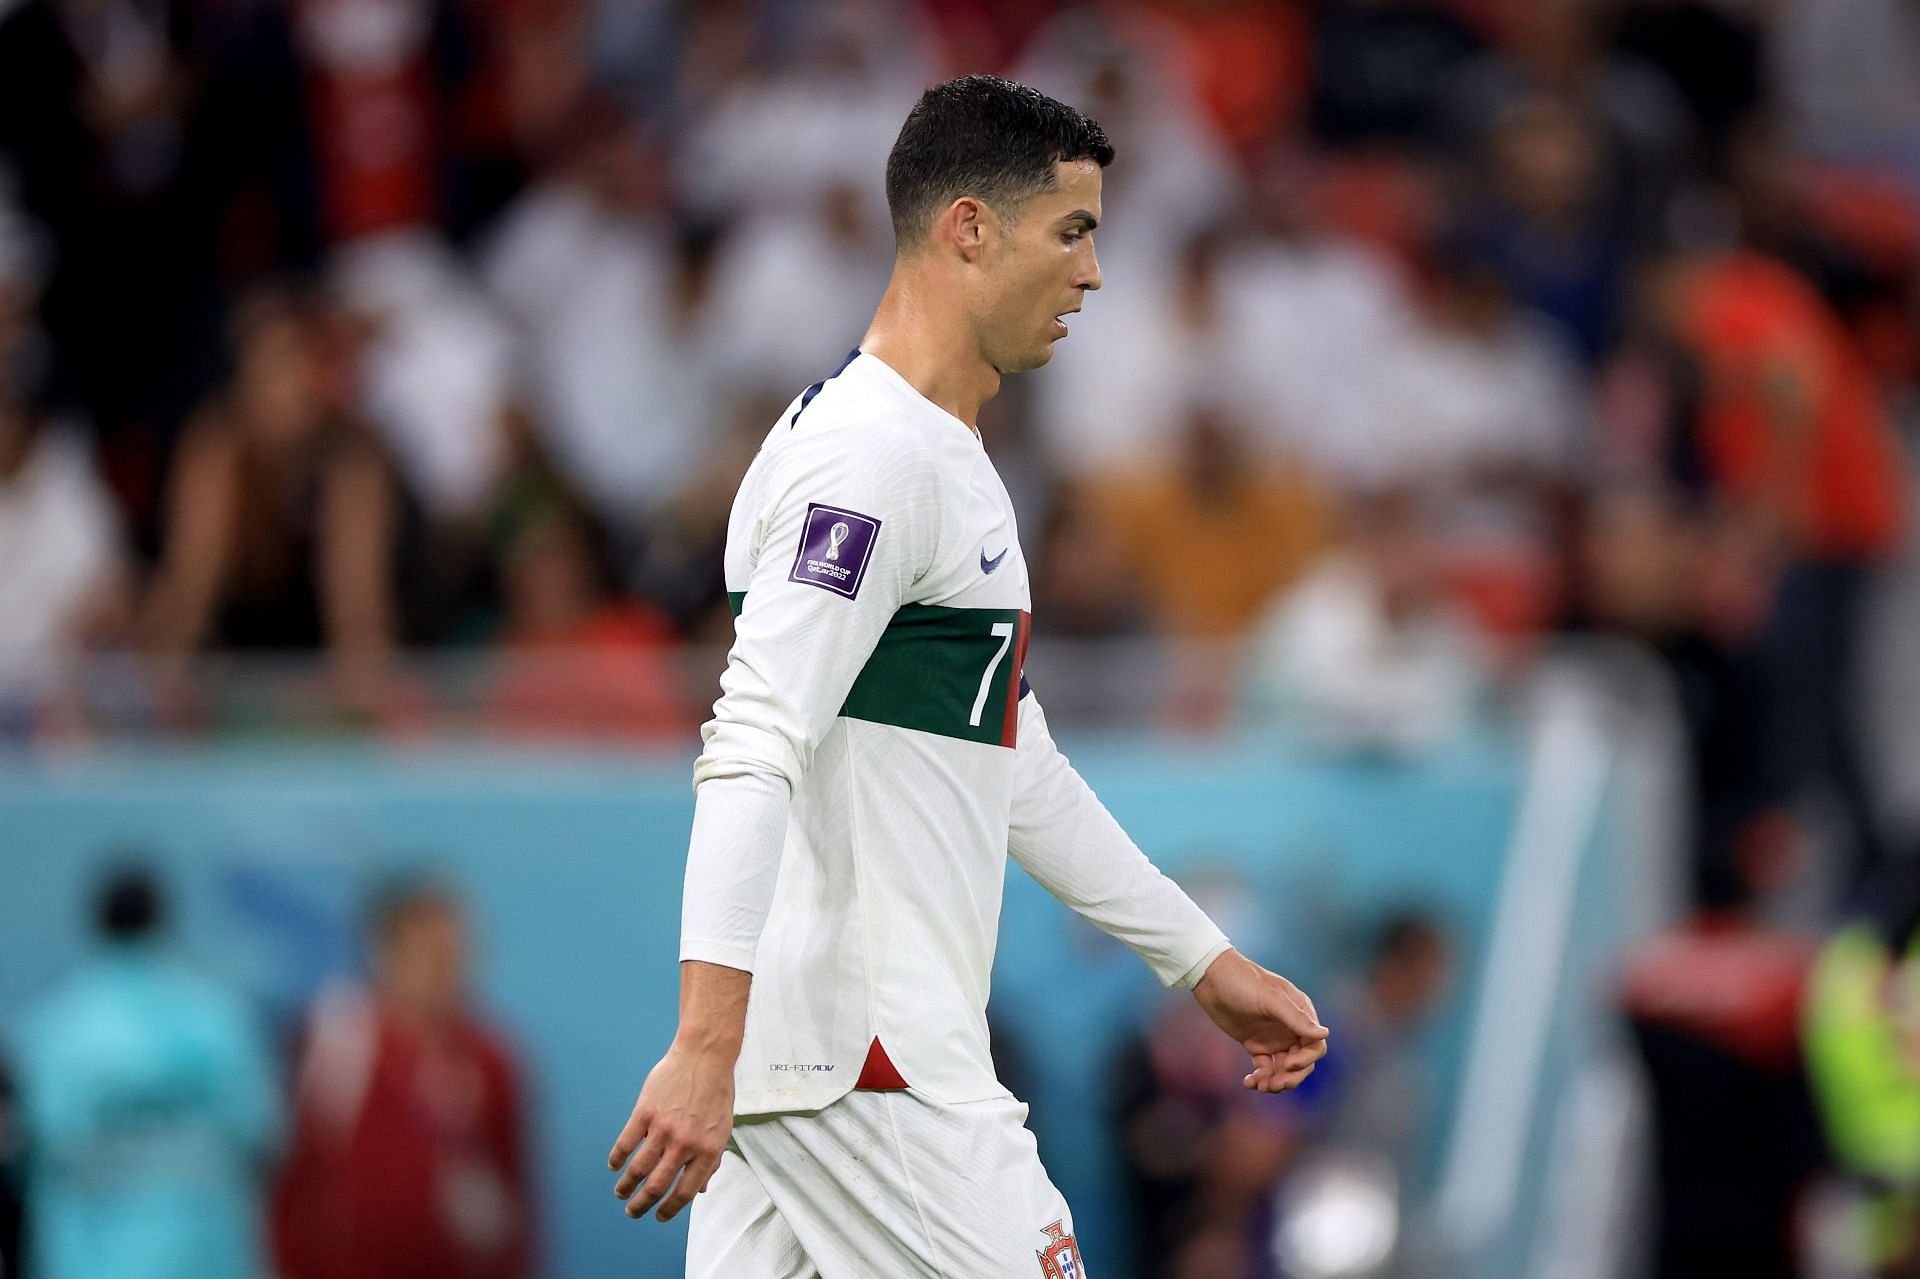 Ronaldo could leave Europe for the first time in his career